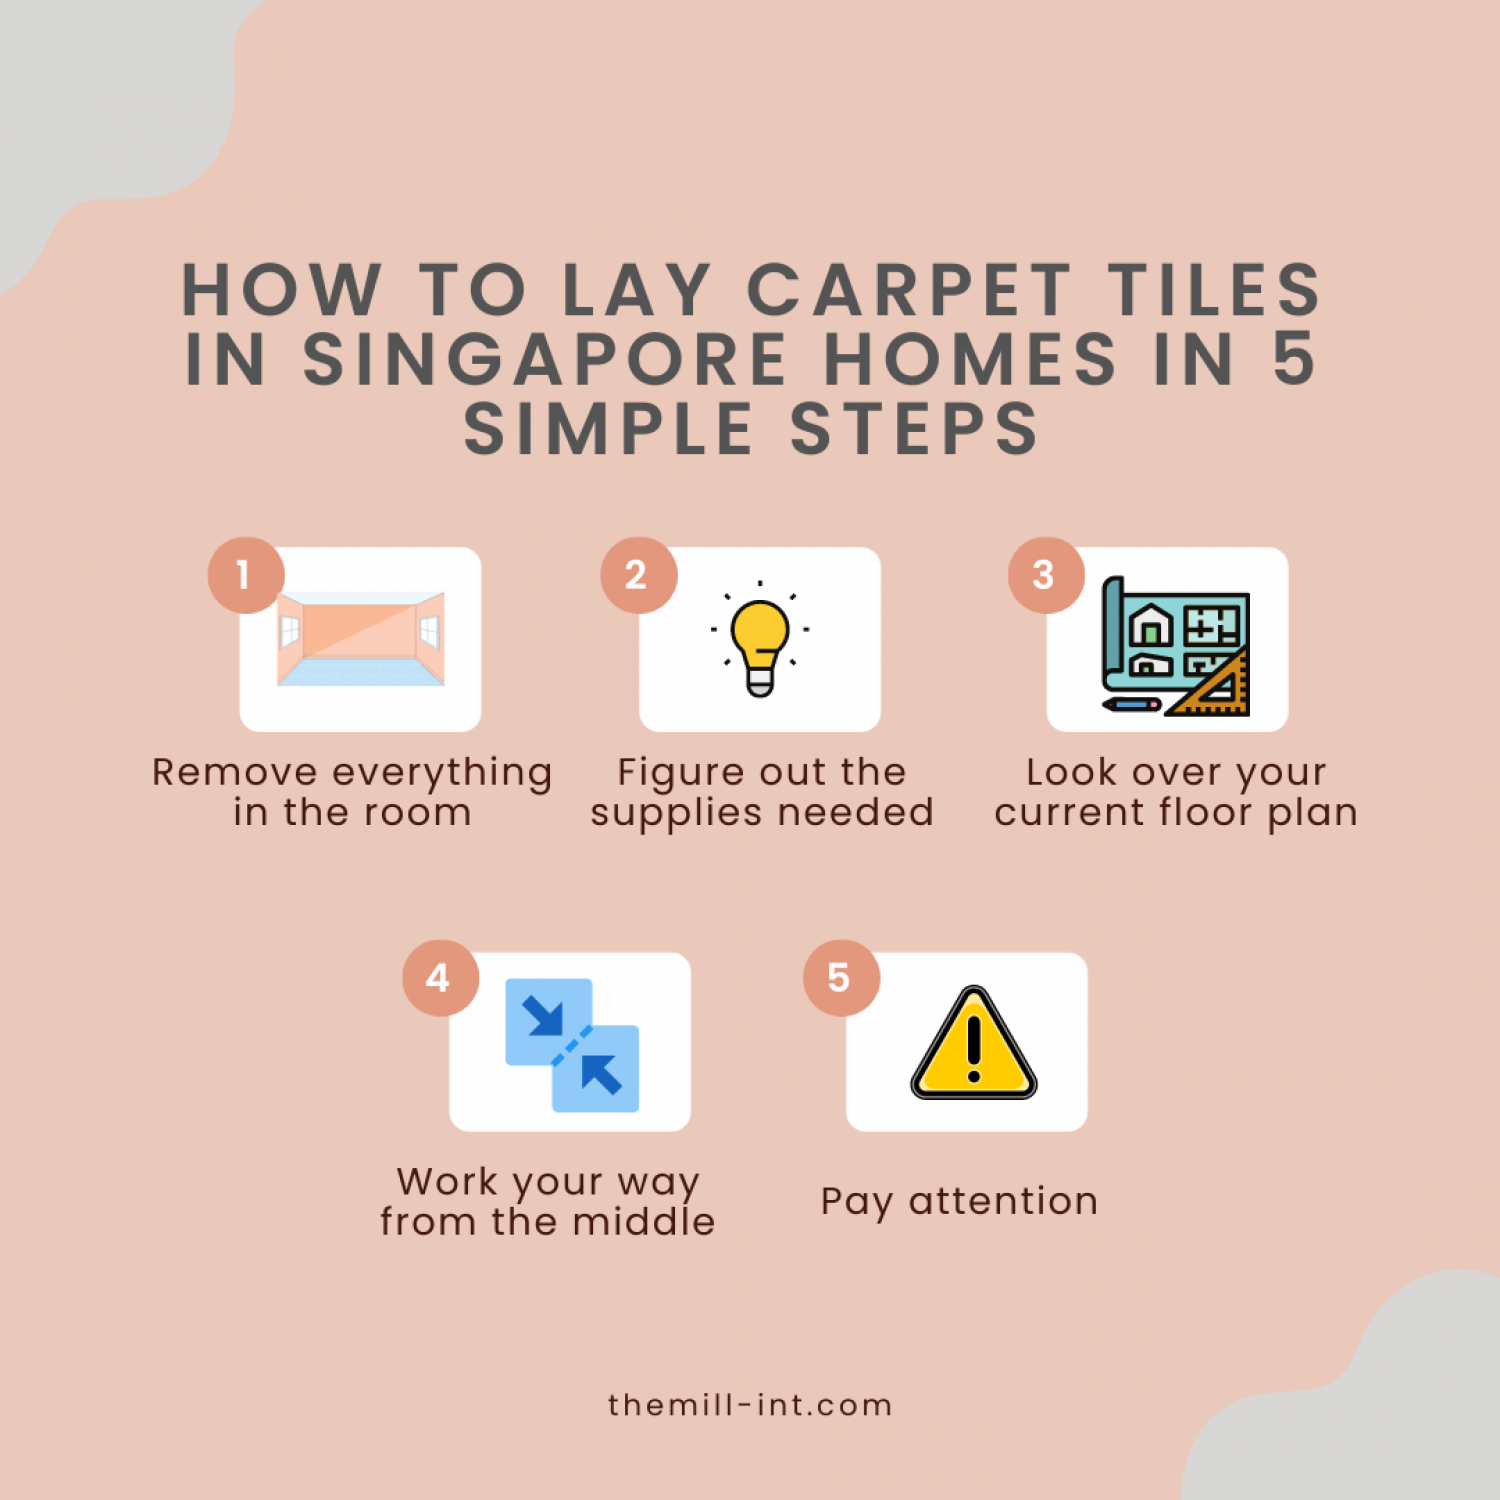 How To Lay Carpet Tiles In Singapore Homes In 5 Simple Steps  Infographic